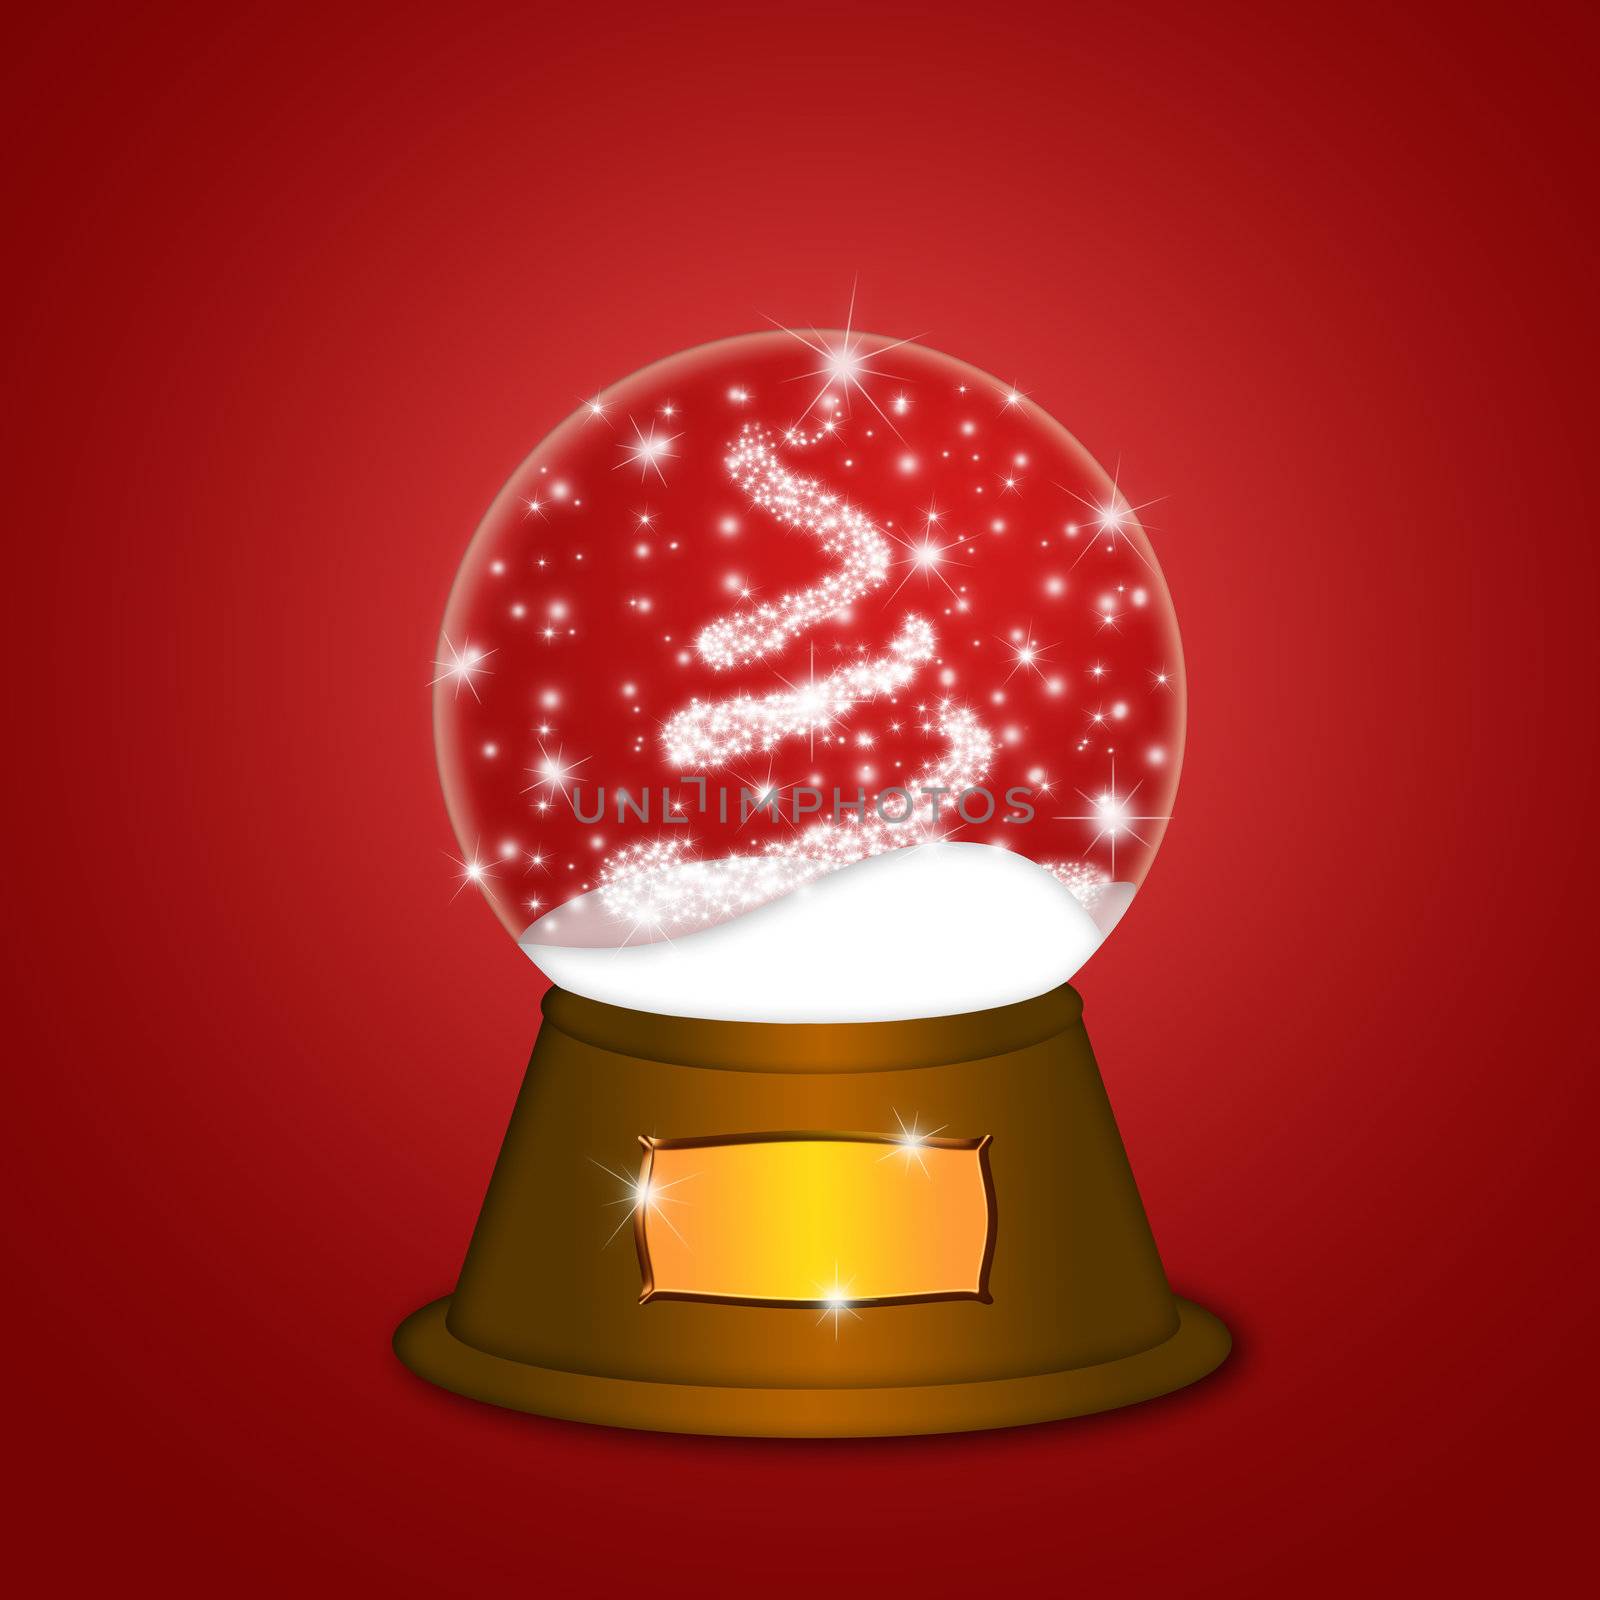 Christmas Water Snow Globe with Christmas Tree Sparkles and Snowflakes Illustration on Red Background